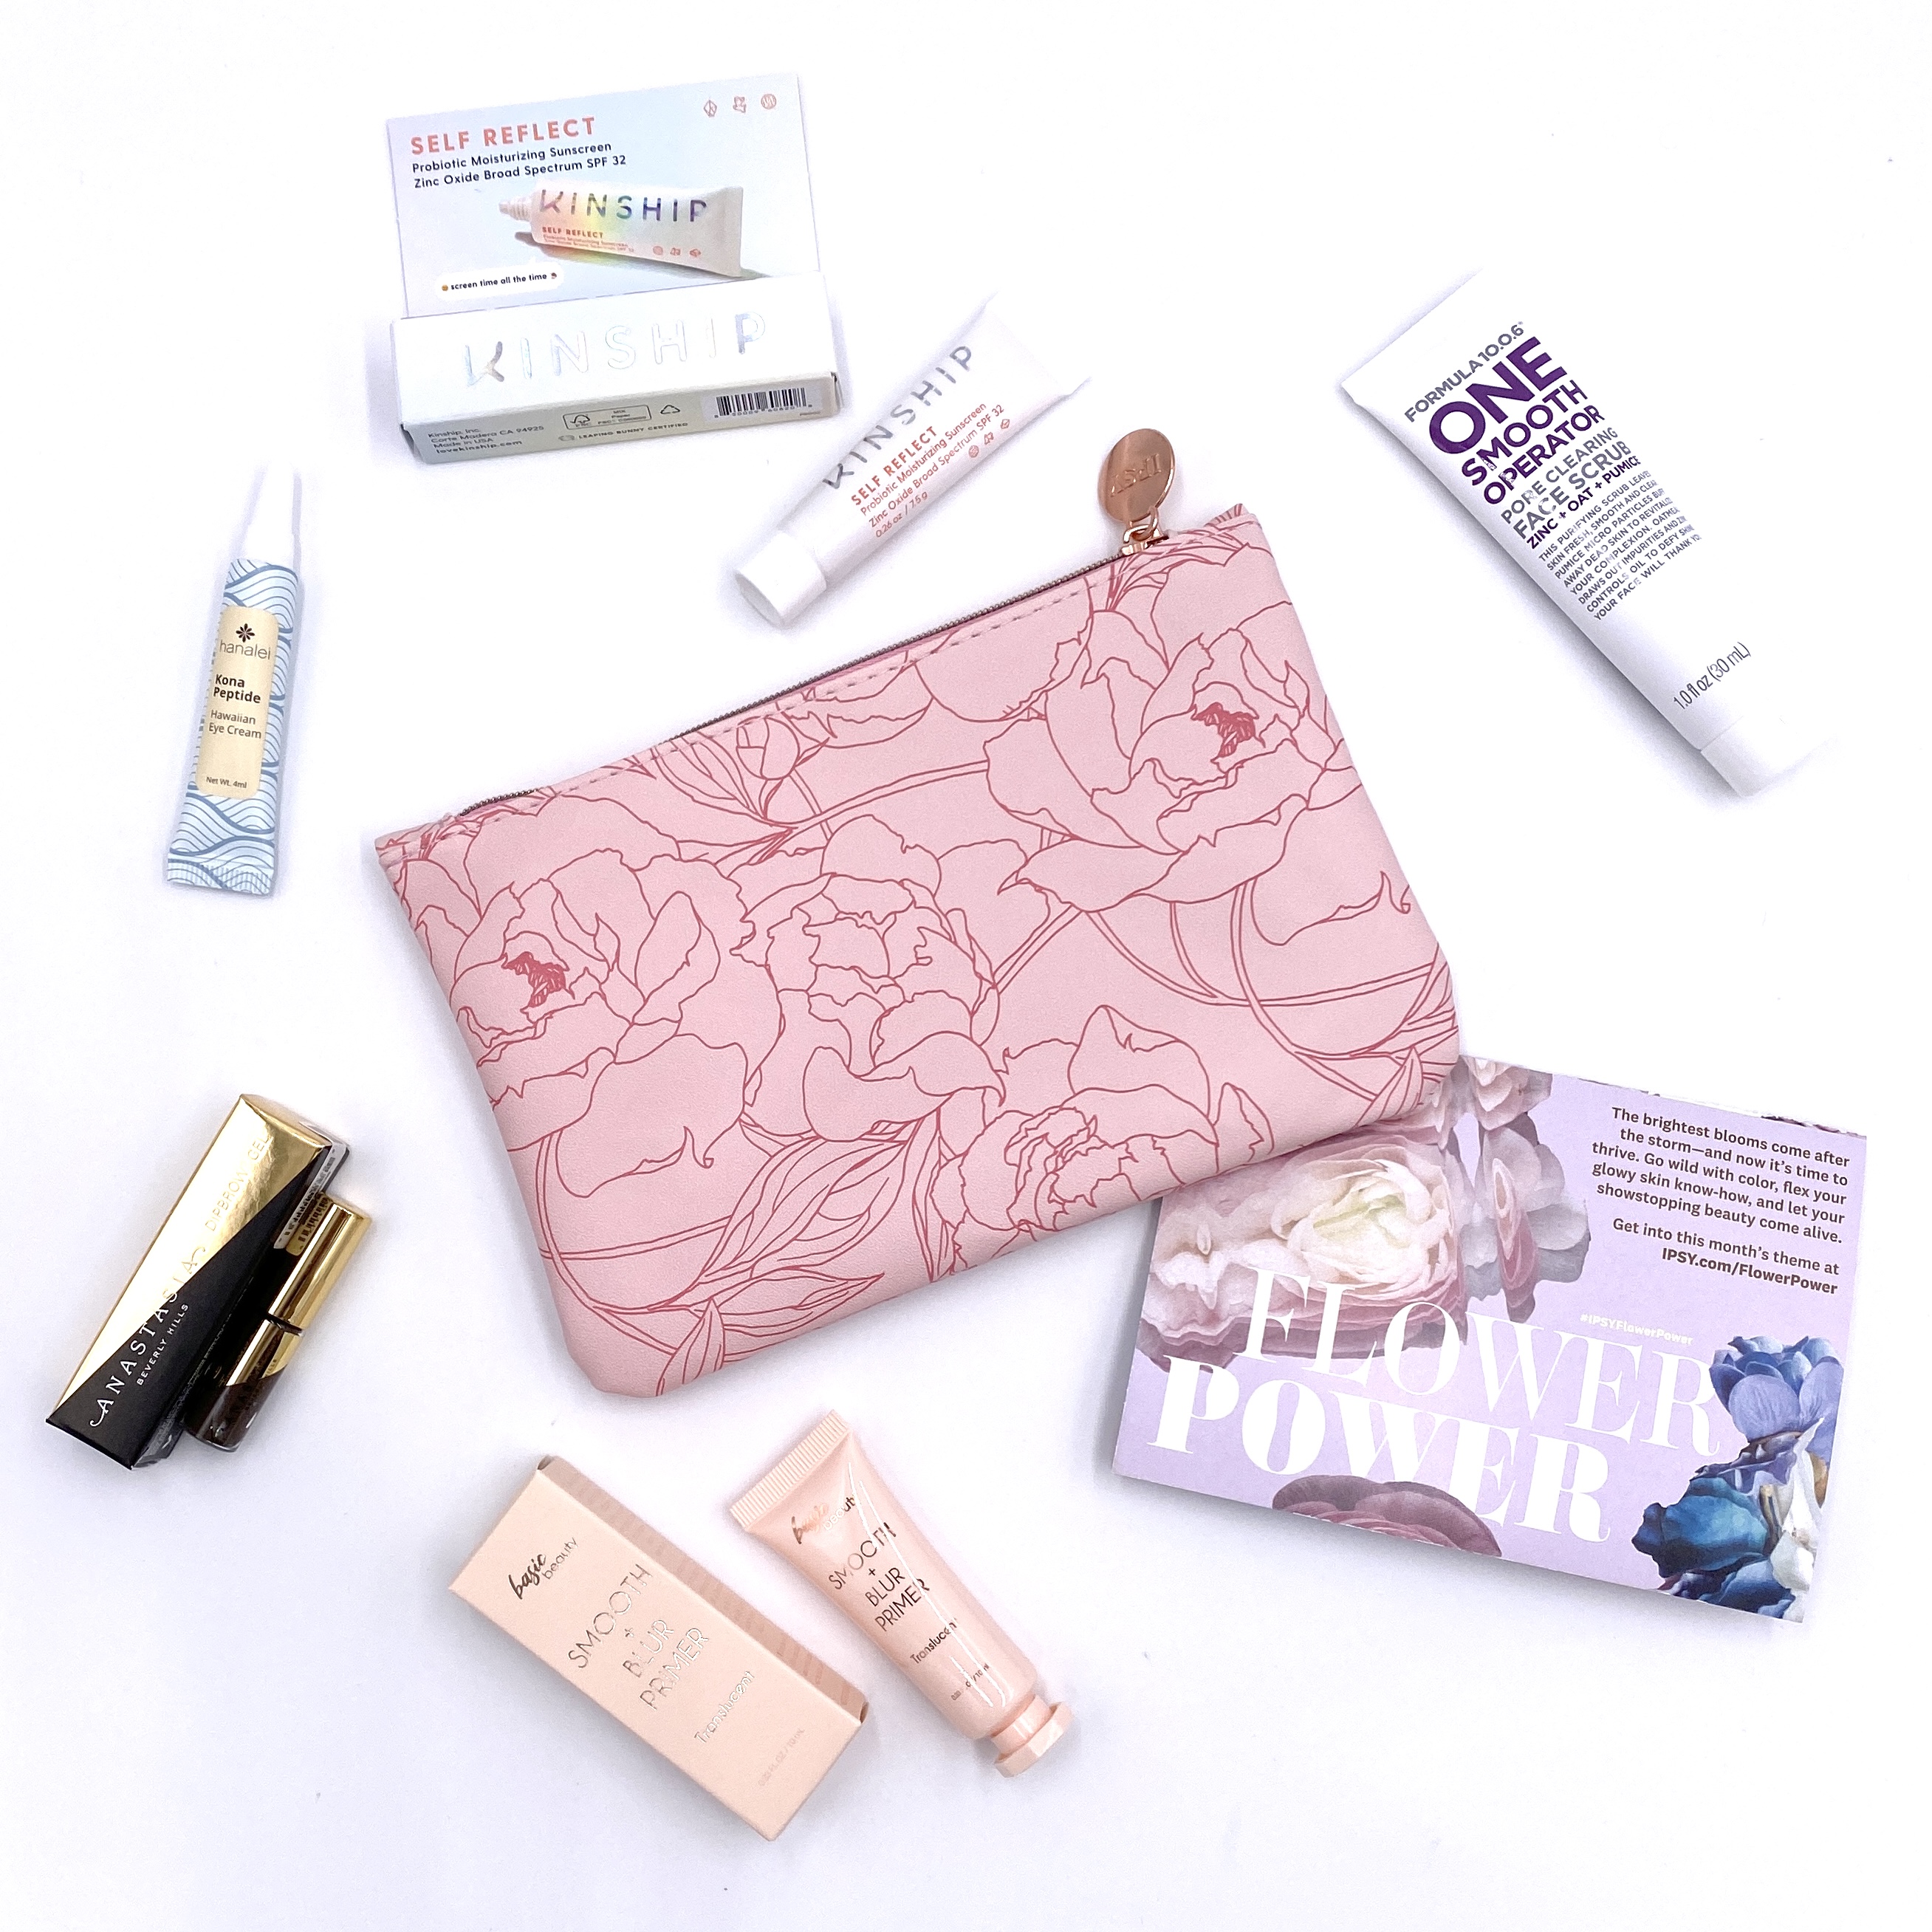 Ipsy May 2021 Review: Anastasia Beverly Hills, Kinship, and More!